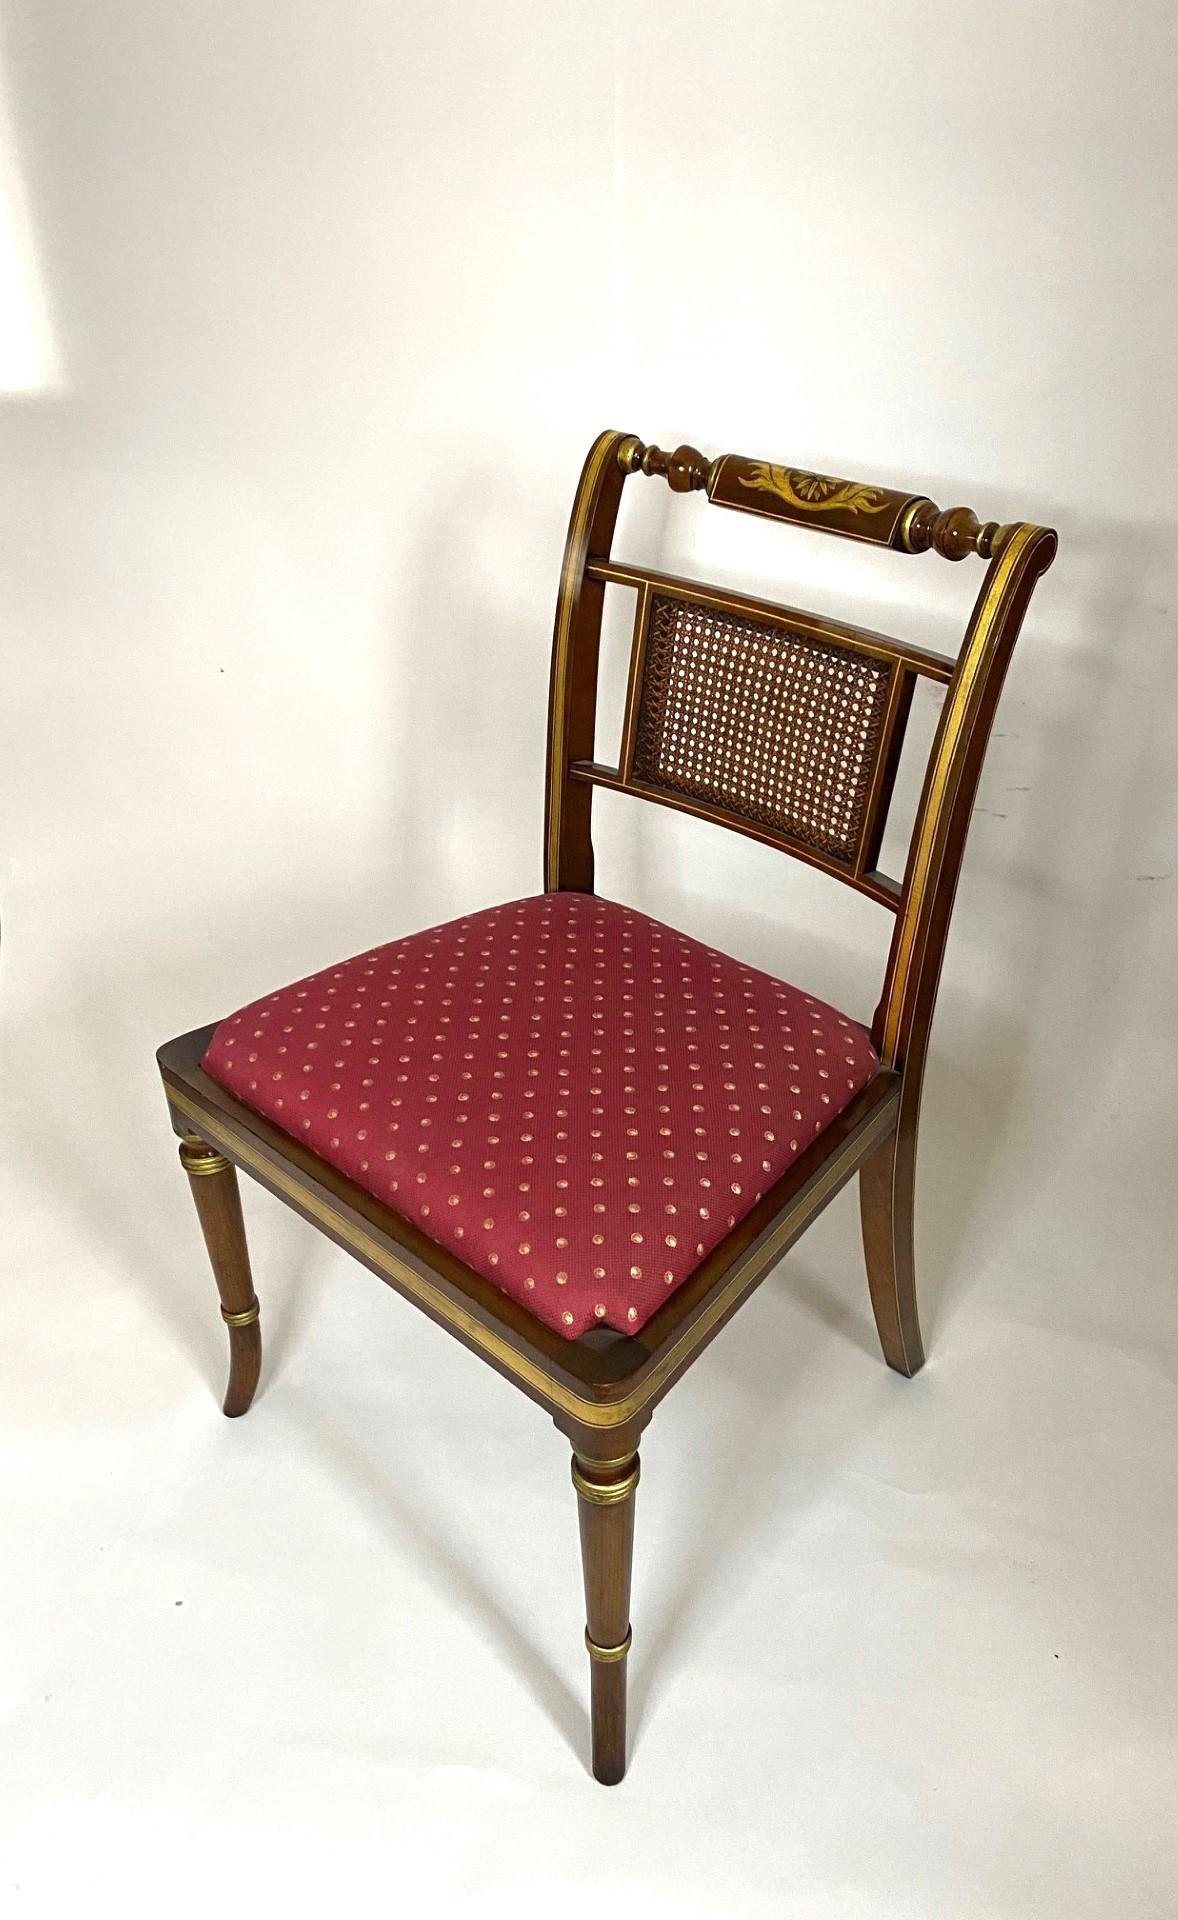 This NEW  Wood & Hogan English-Made Regency Style Faux Rosewood Side Chair is an exquisite piece of furniture that embodies the elegance and craftsmanship of the Regency era. Crafted with meticulous attention to detail, this chair boasts a faux